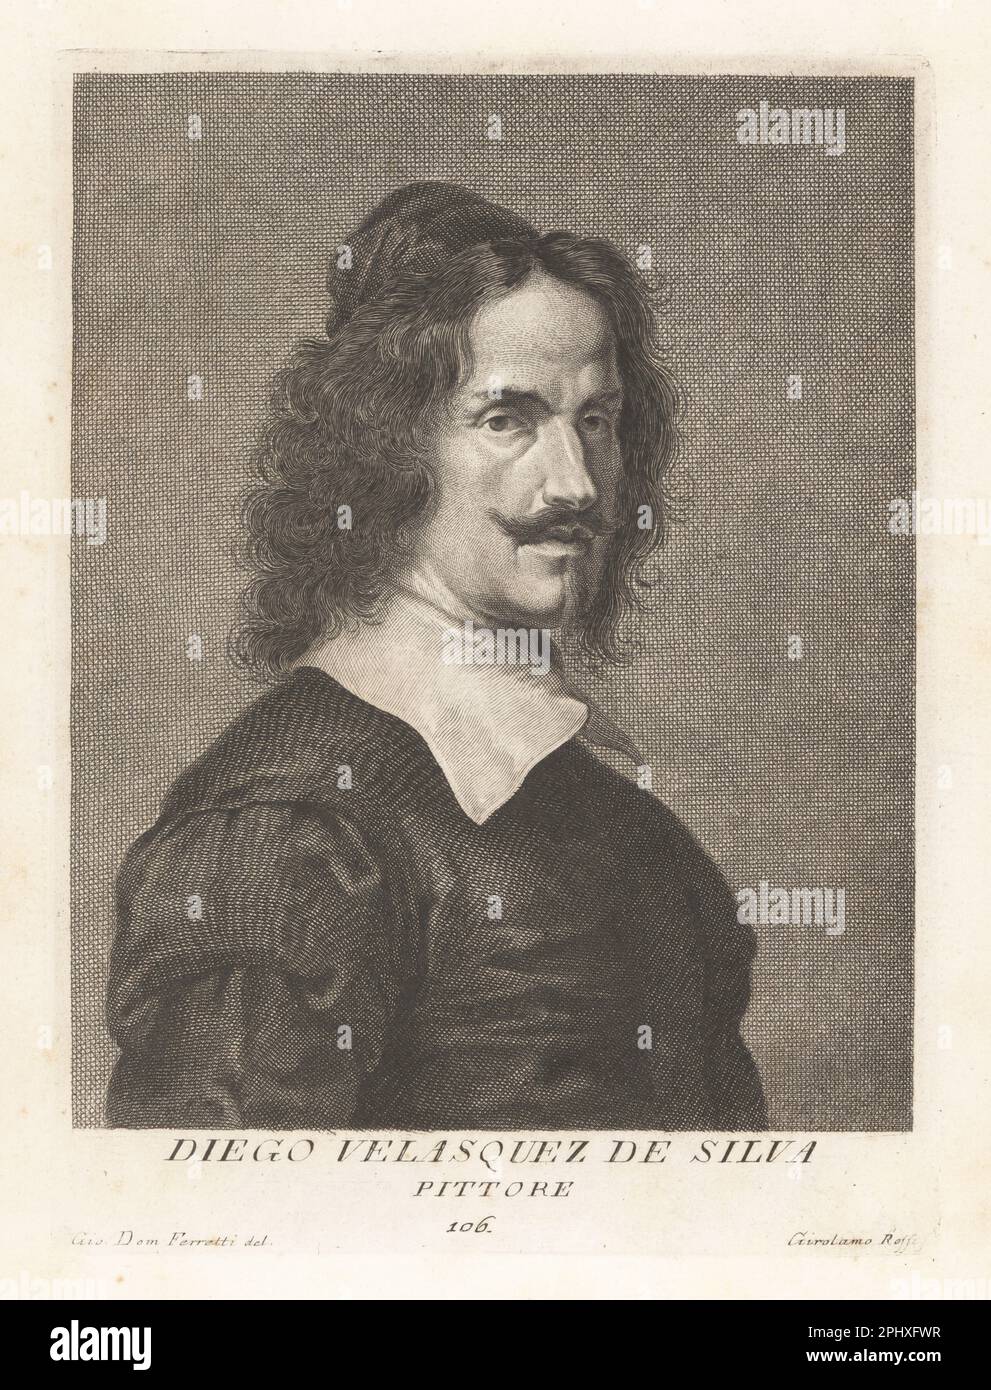 Diego Rodríguez de Silva y Velázquez, Spanish painter, the leading artist in the court of King Philip IV of Spain and Portugal, and of the Spanish Golden Age, 1599-1660. Diego Velasquez de Silva, Pittore. Copperplate engraving by Girolamo Rossi after Giovanni Domenico Ferretti after a self portrait by the artist from Francesco Moucke's Museo Florentino (Museum Florentinum), Serie di Ritratti de Pittori (Series of Portraits of Painters) stamperia Mouckiana, Florence, 1752-62. Stock Photo